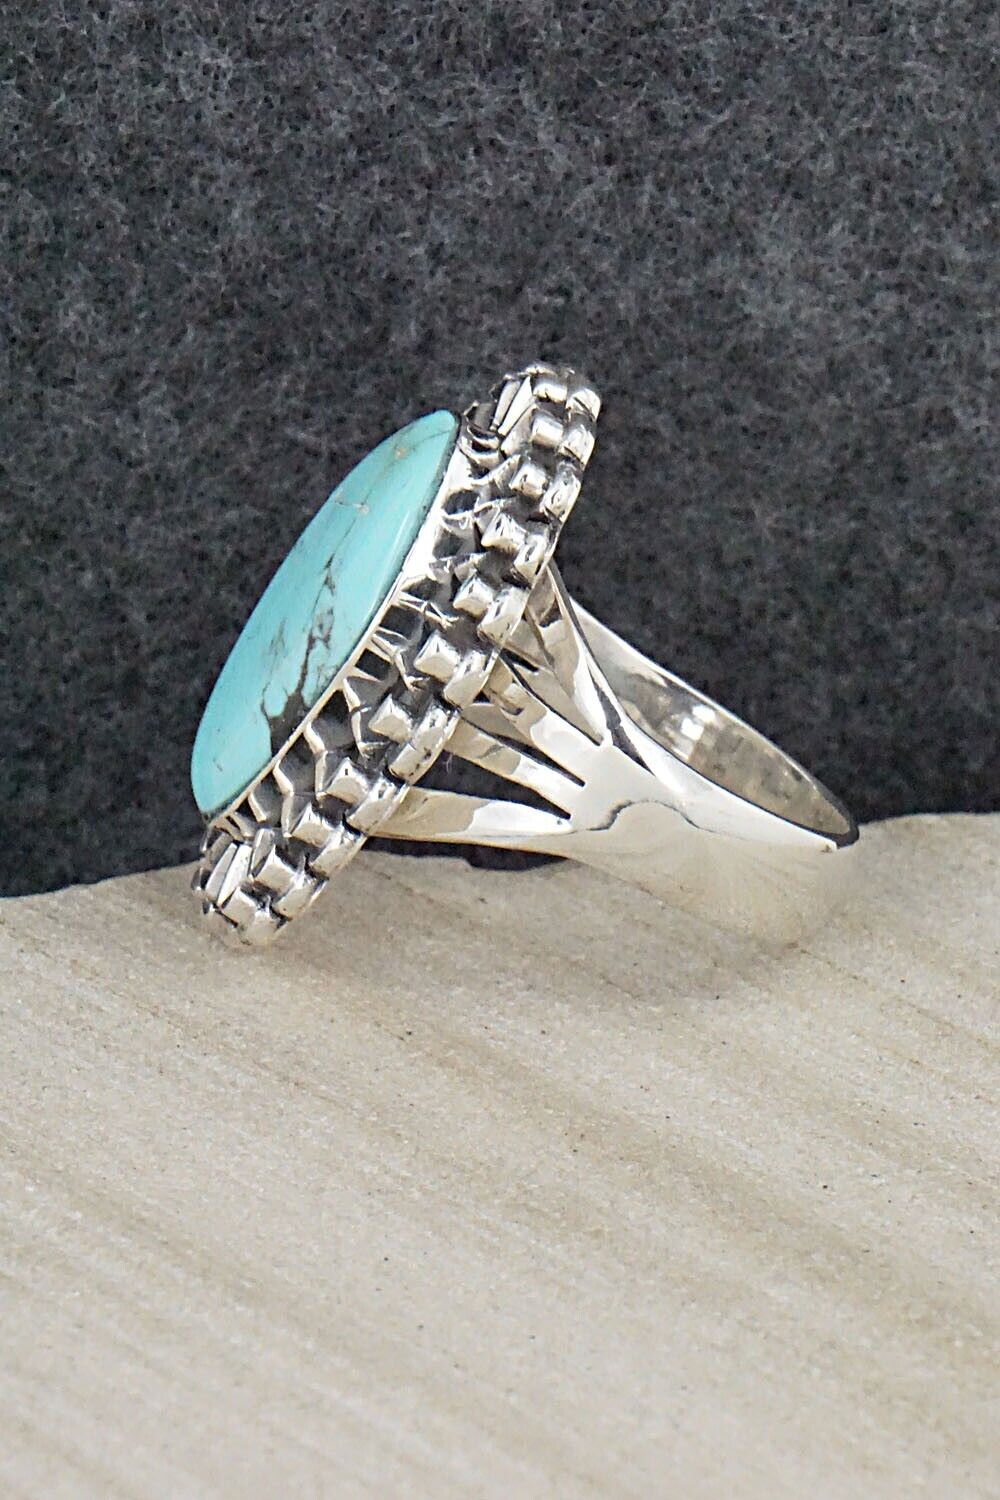 Turquoise & Sterling Silver Ring - Jimson Belin - Size 10